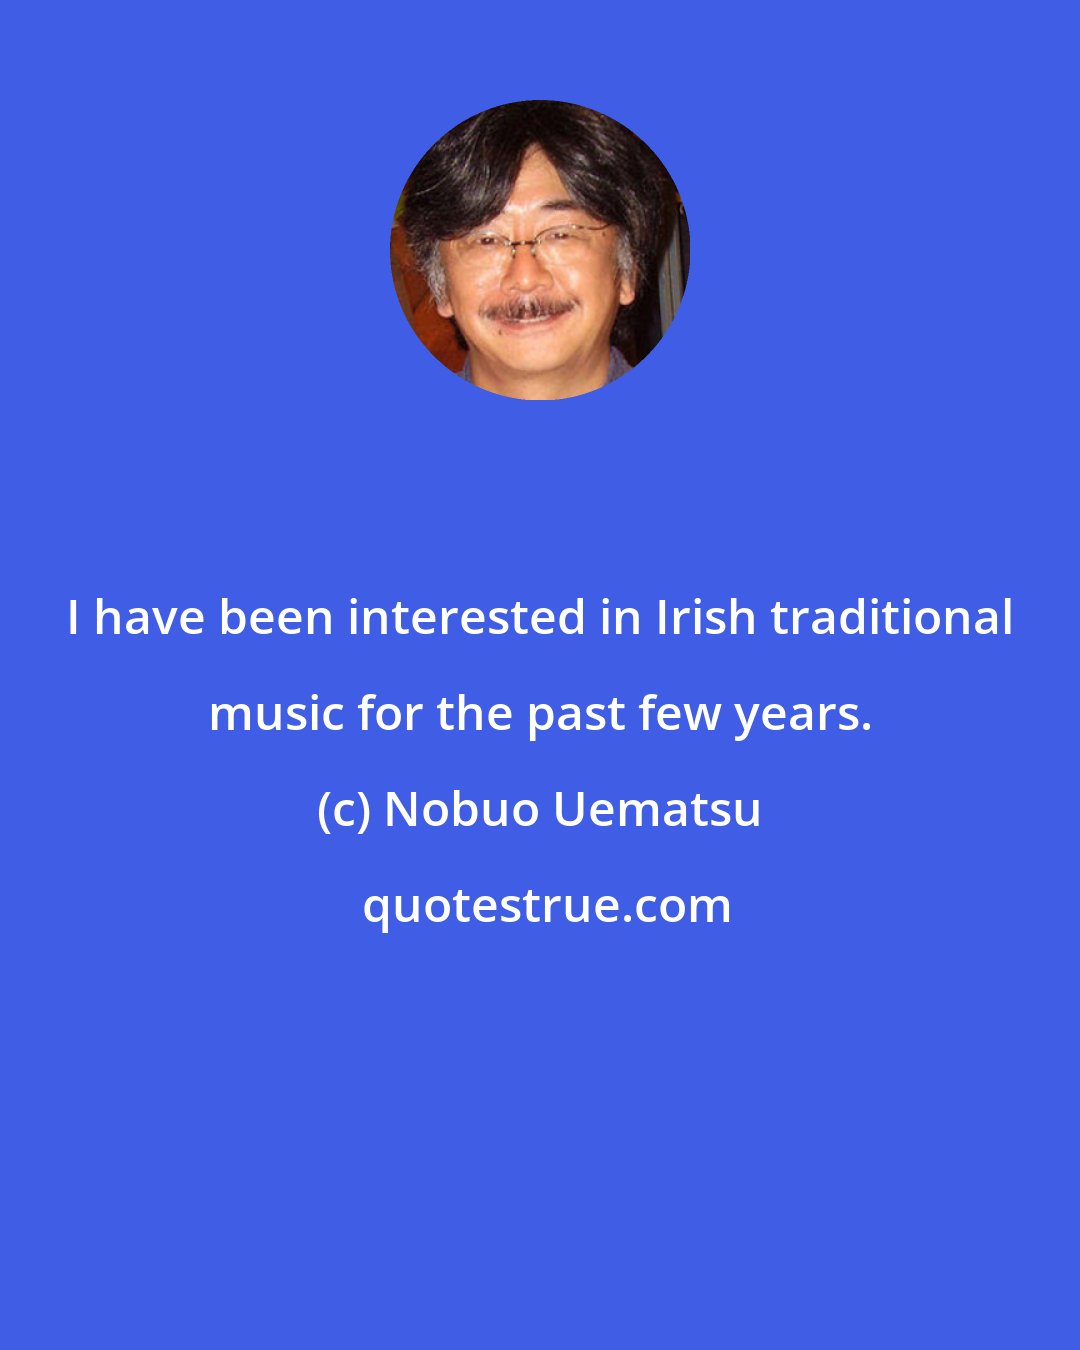 Nobuo Uematsu: I have been interested in Irish traditional music for the past few years.